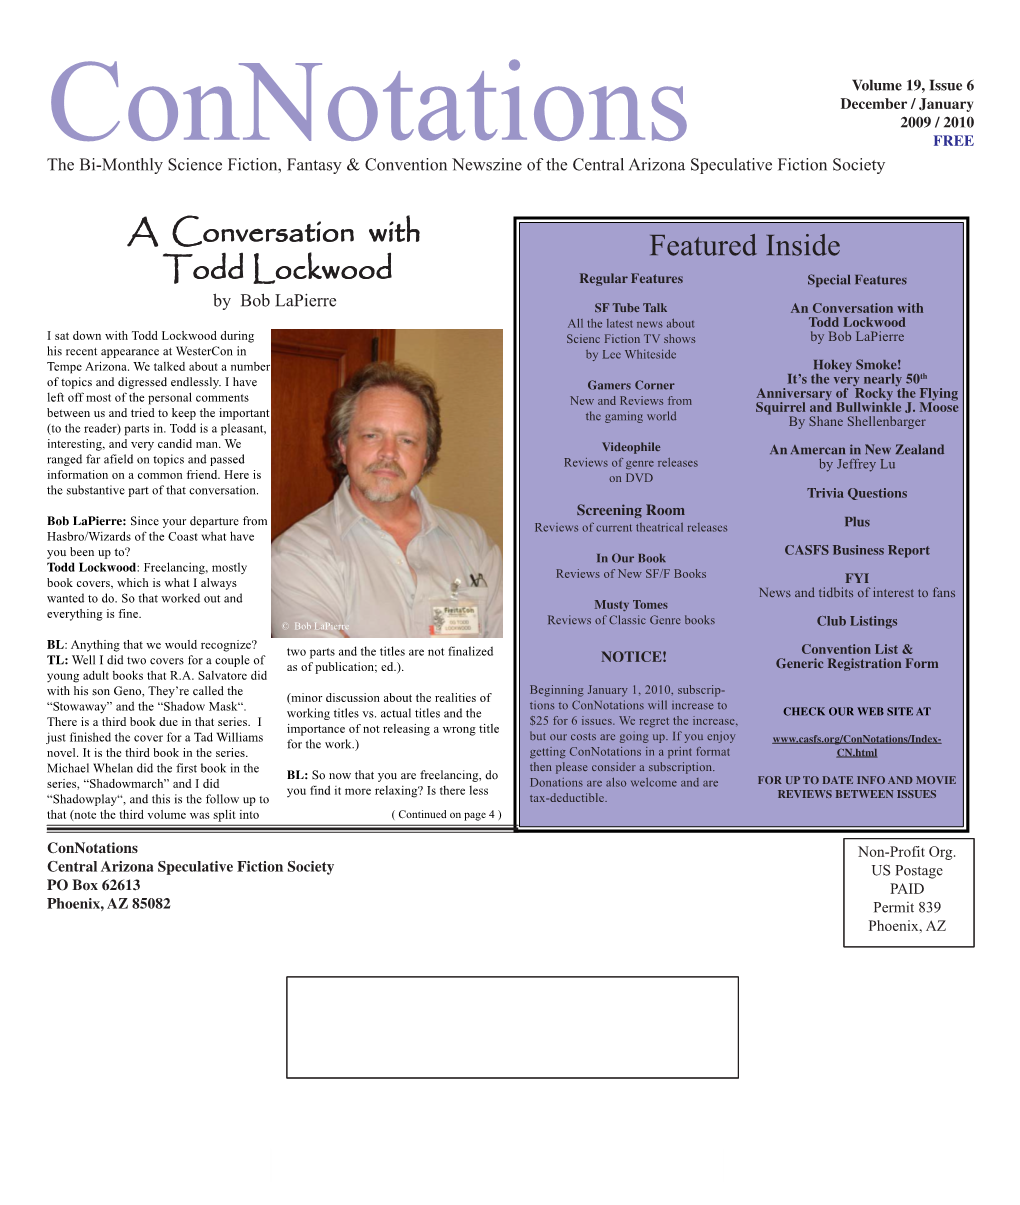 Connotations 19 6